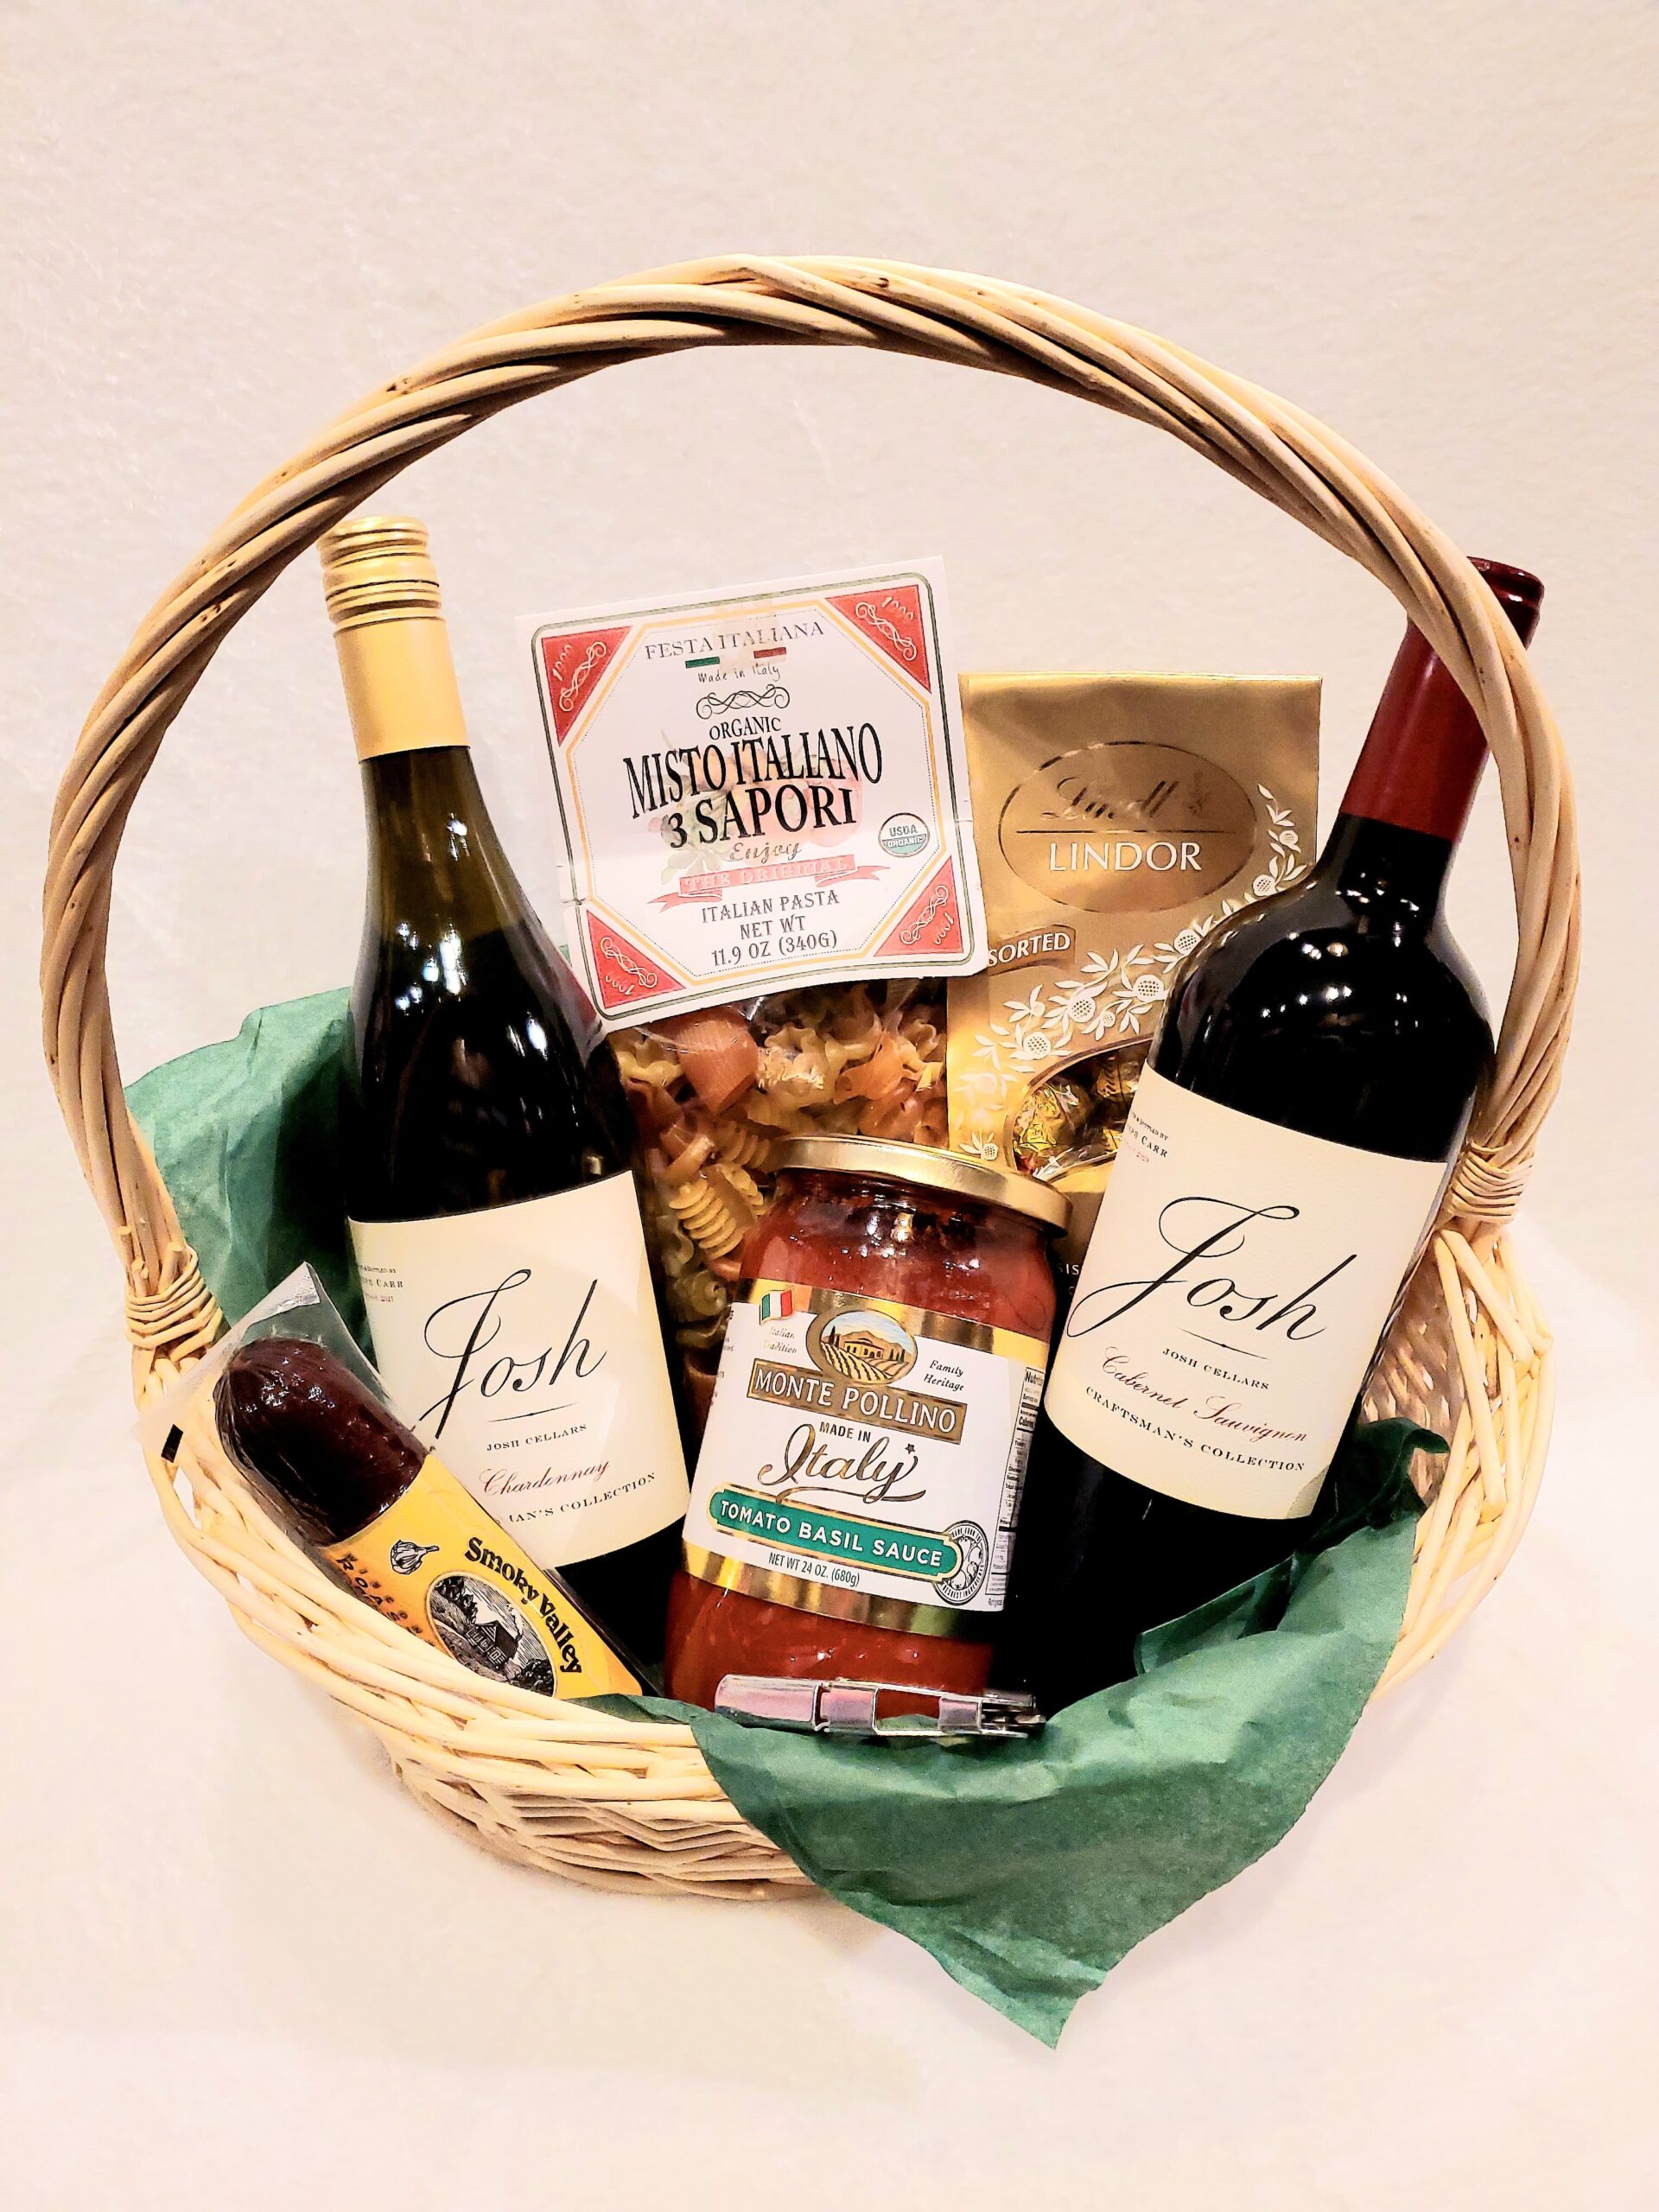 A wicker basket with handle two bottle of wine, pasta, and assorted snacks.